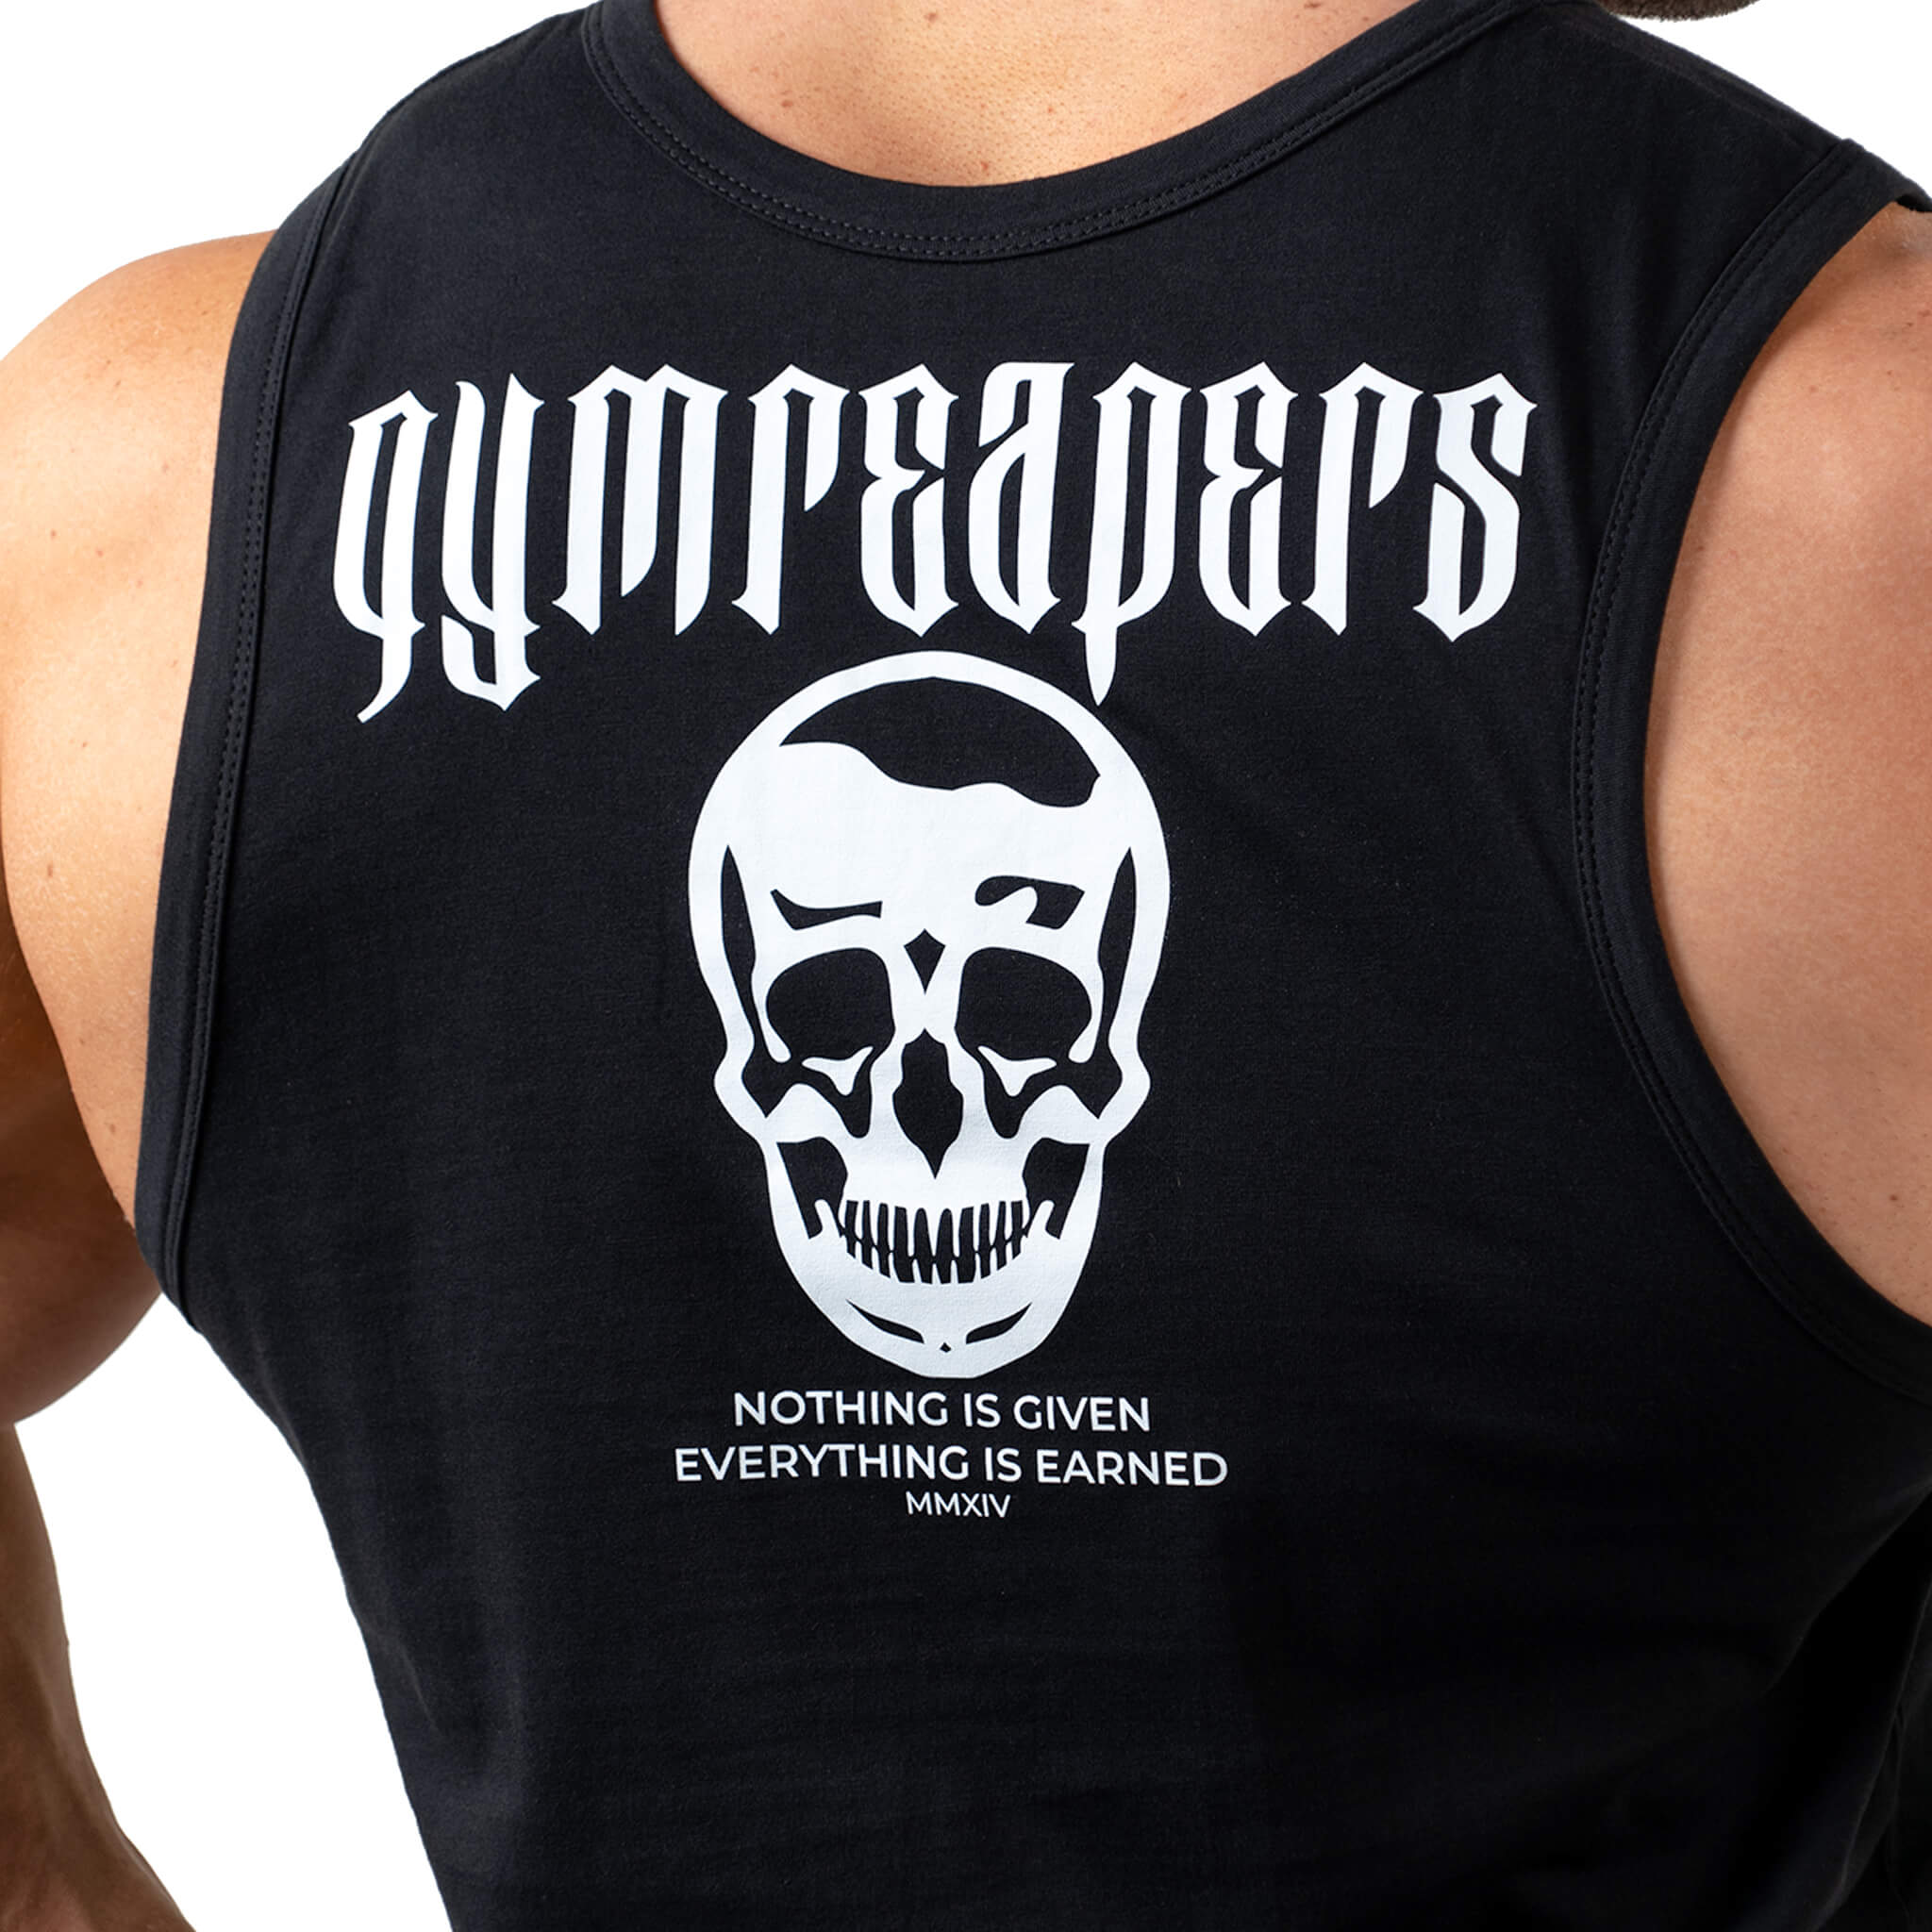 gymreapers mmxiv cutoff tank top